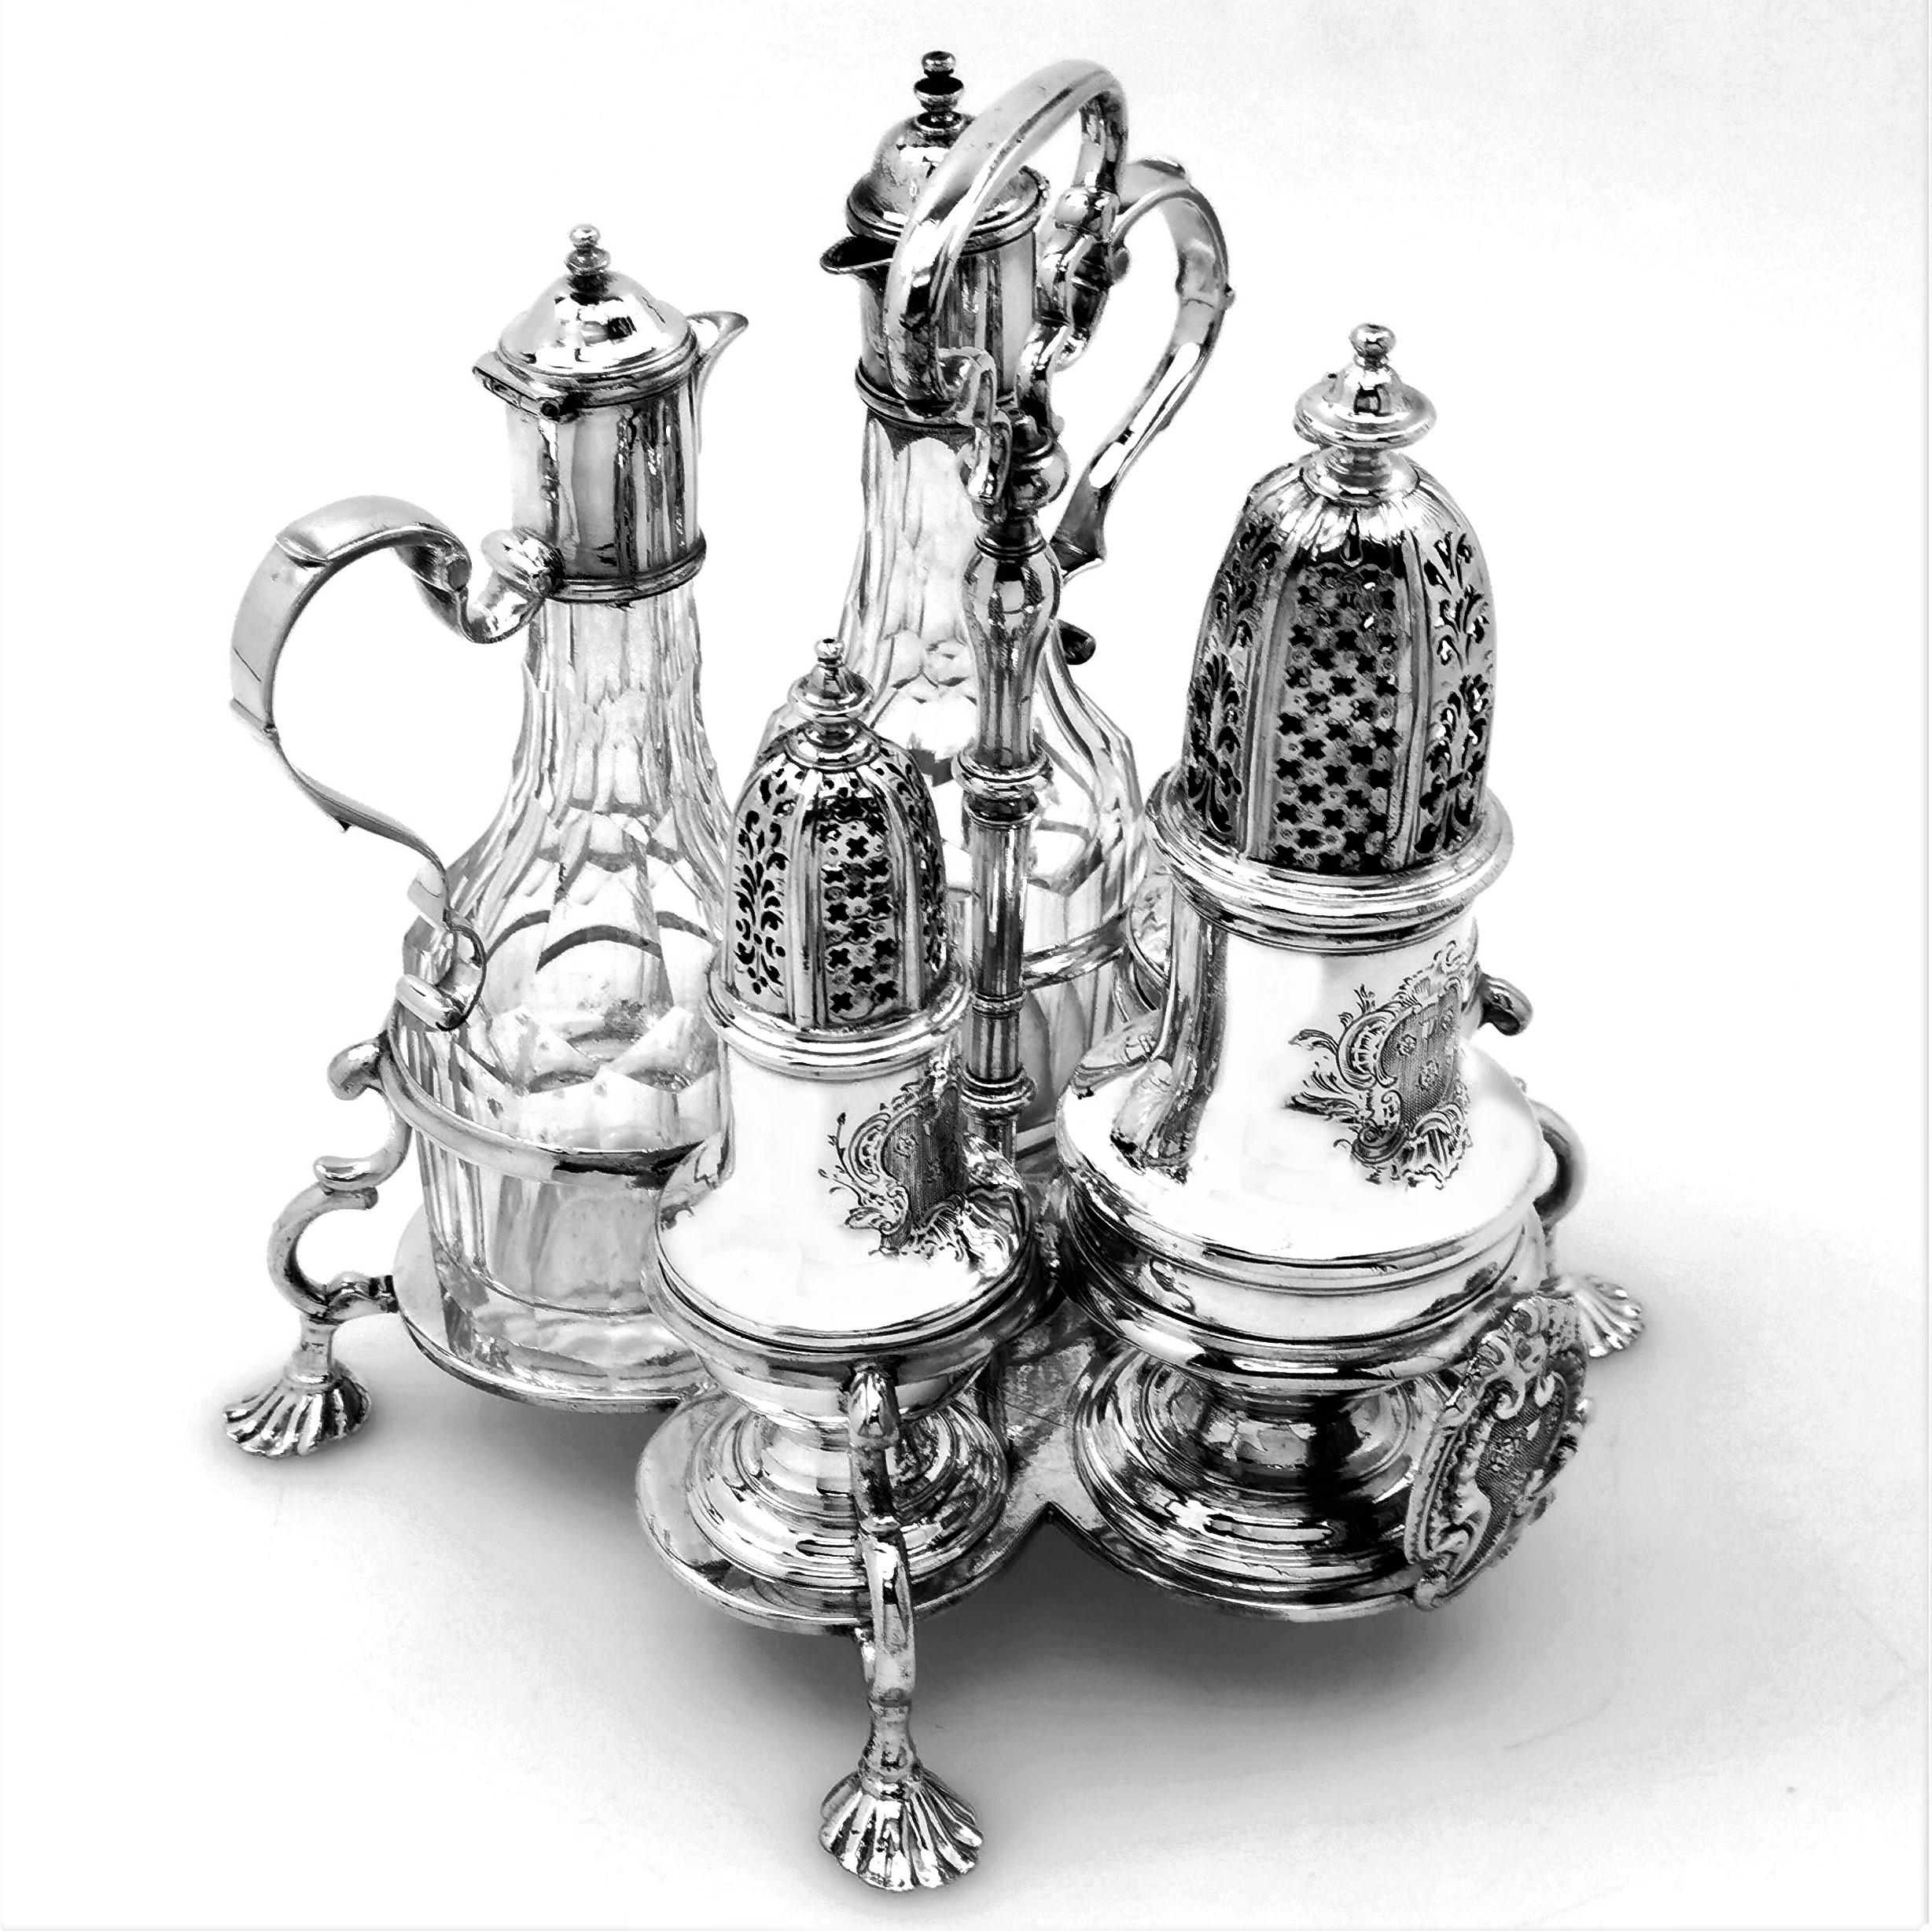 A classic Antique George II sterling Silver Cruet Stand in the traditional 'Warwick' style after the set originally created for the Earl of Warwick. The Cruet Stand contains a set of five Condiment containers including a pair of cut glass oil &